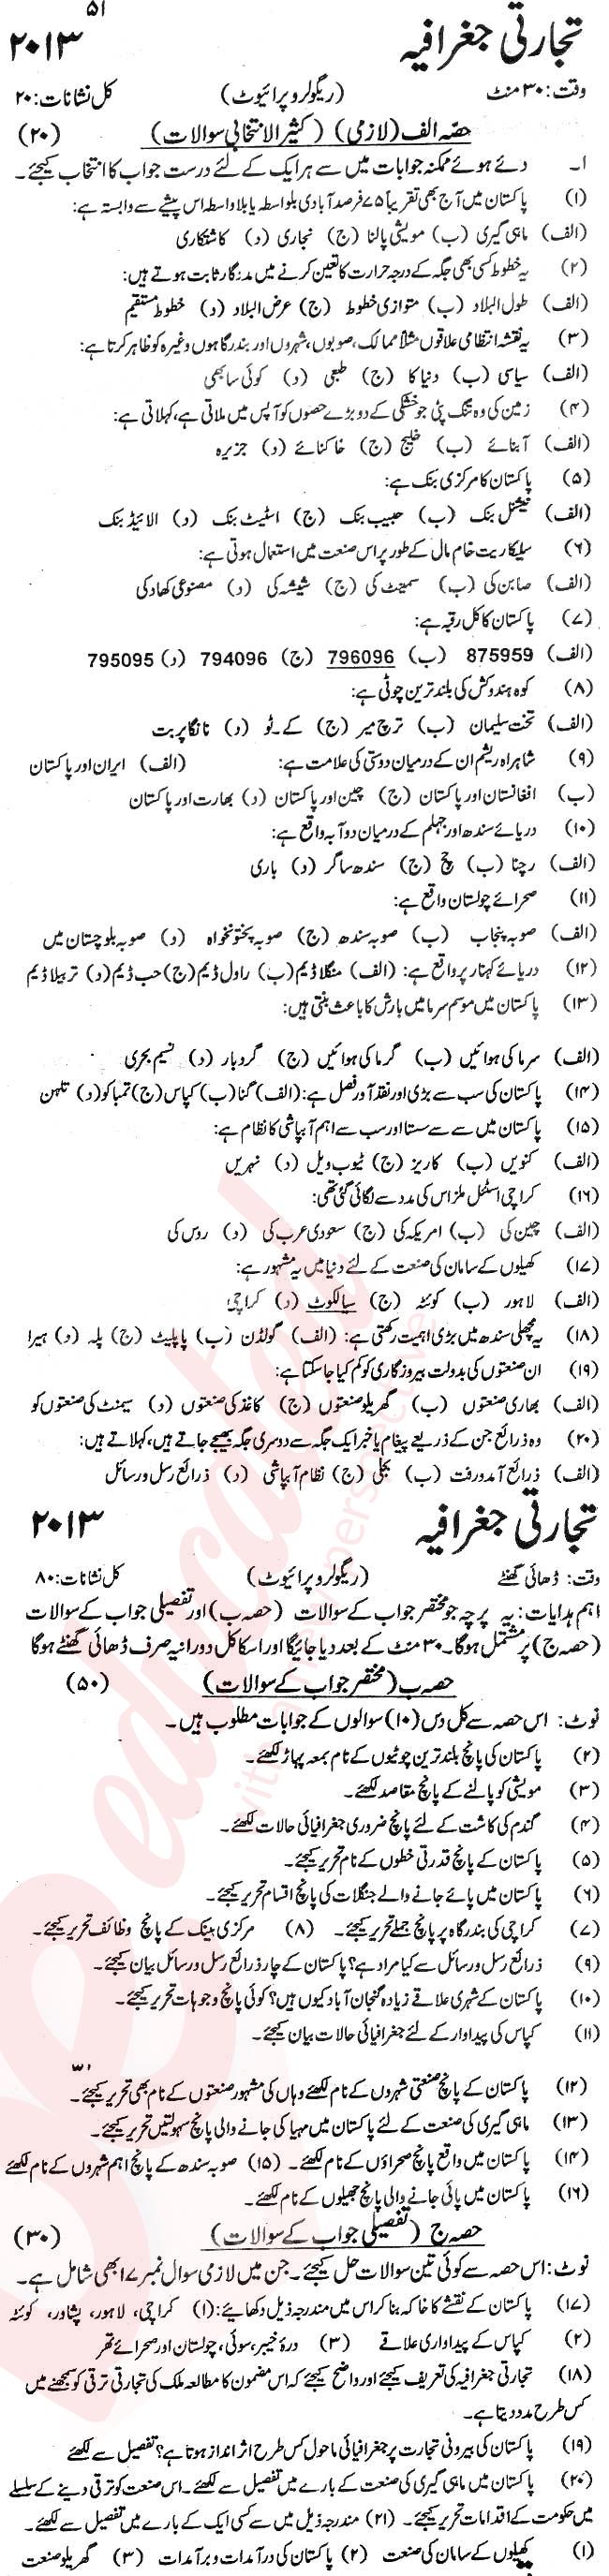 Commercial Geography 10th Urdu Medium Past Paper Group 1 KPBTE 2013